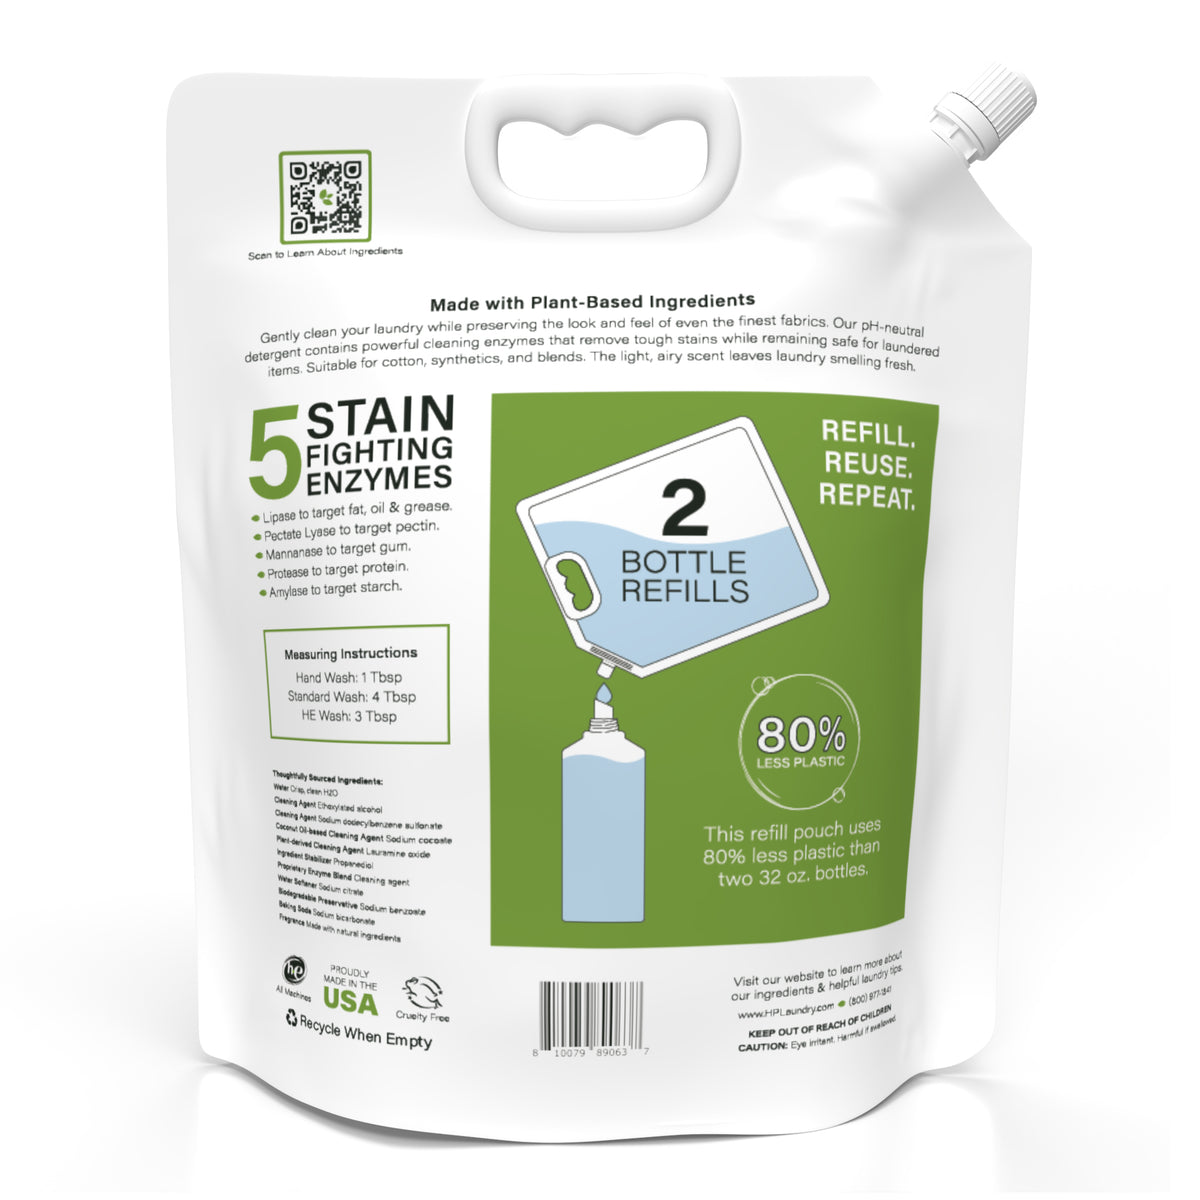 How do Enzymes in Laundry Detergent Break Down and Remove Tough Stains -  Heritage Park Laundry Essentials